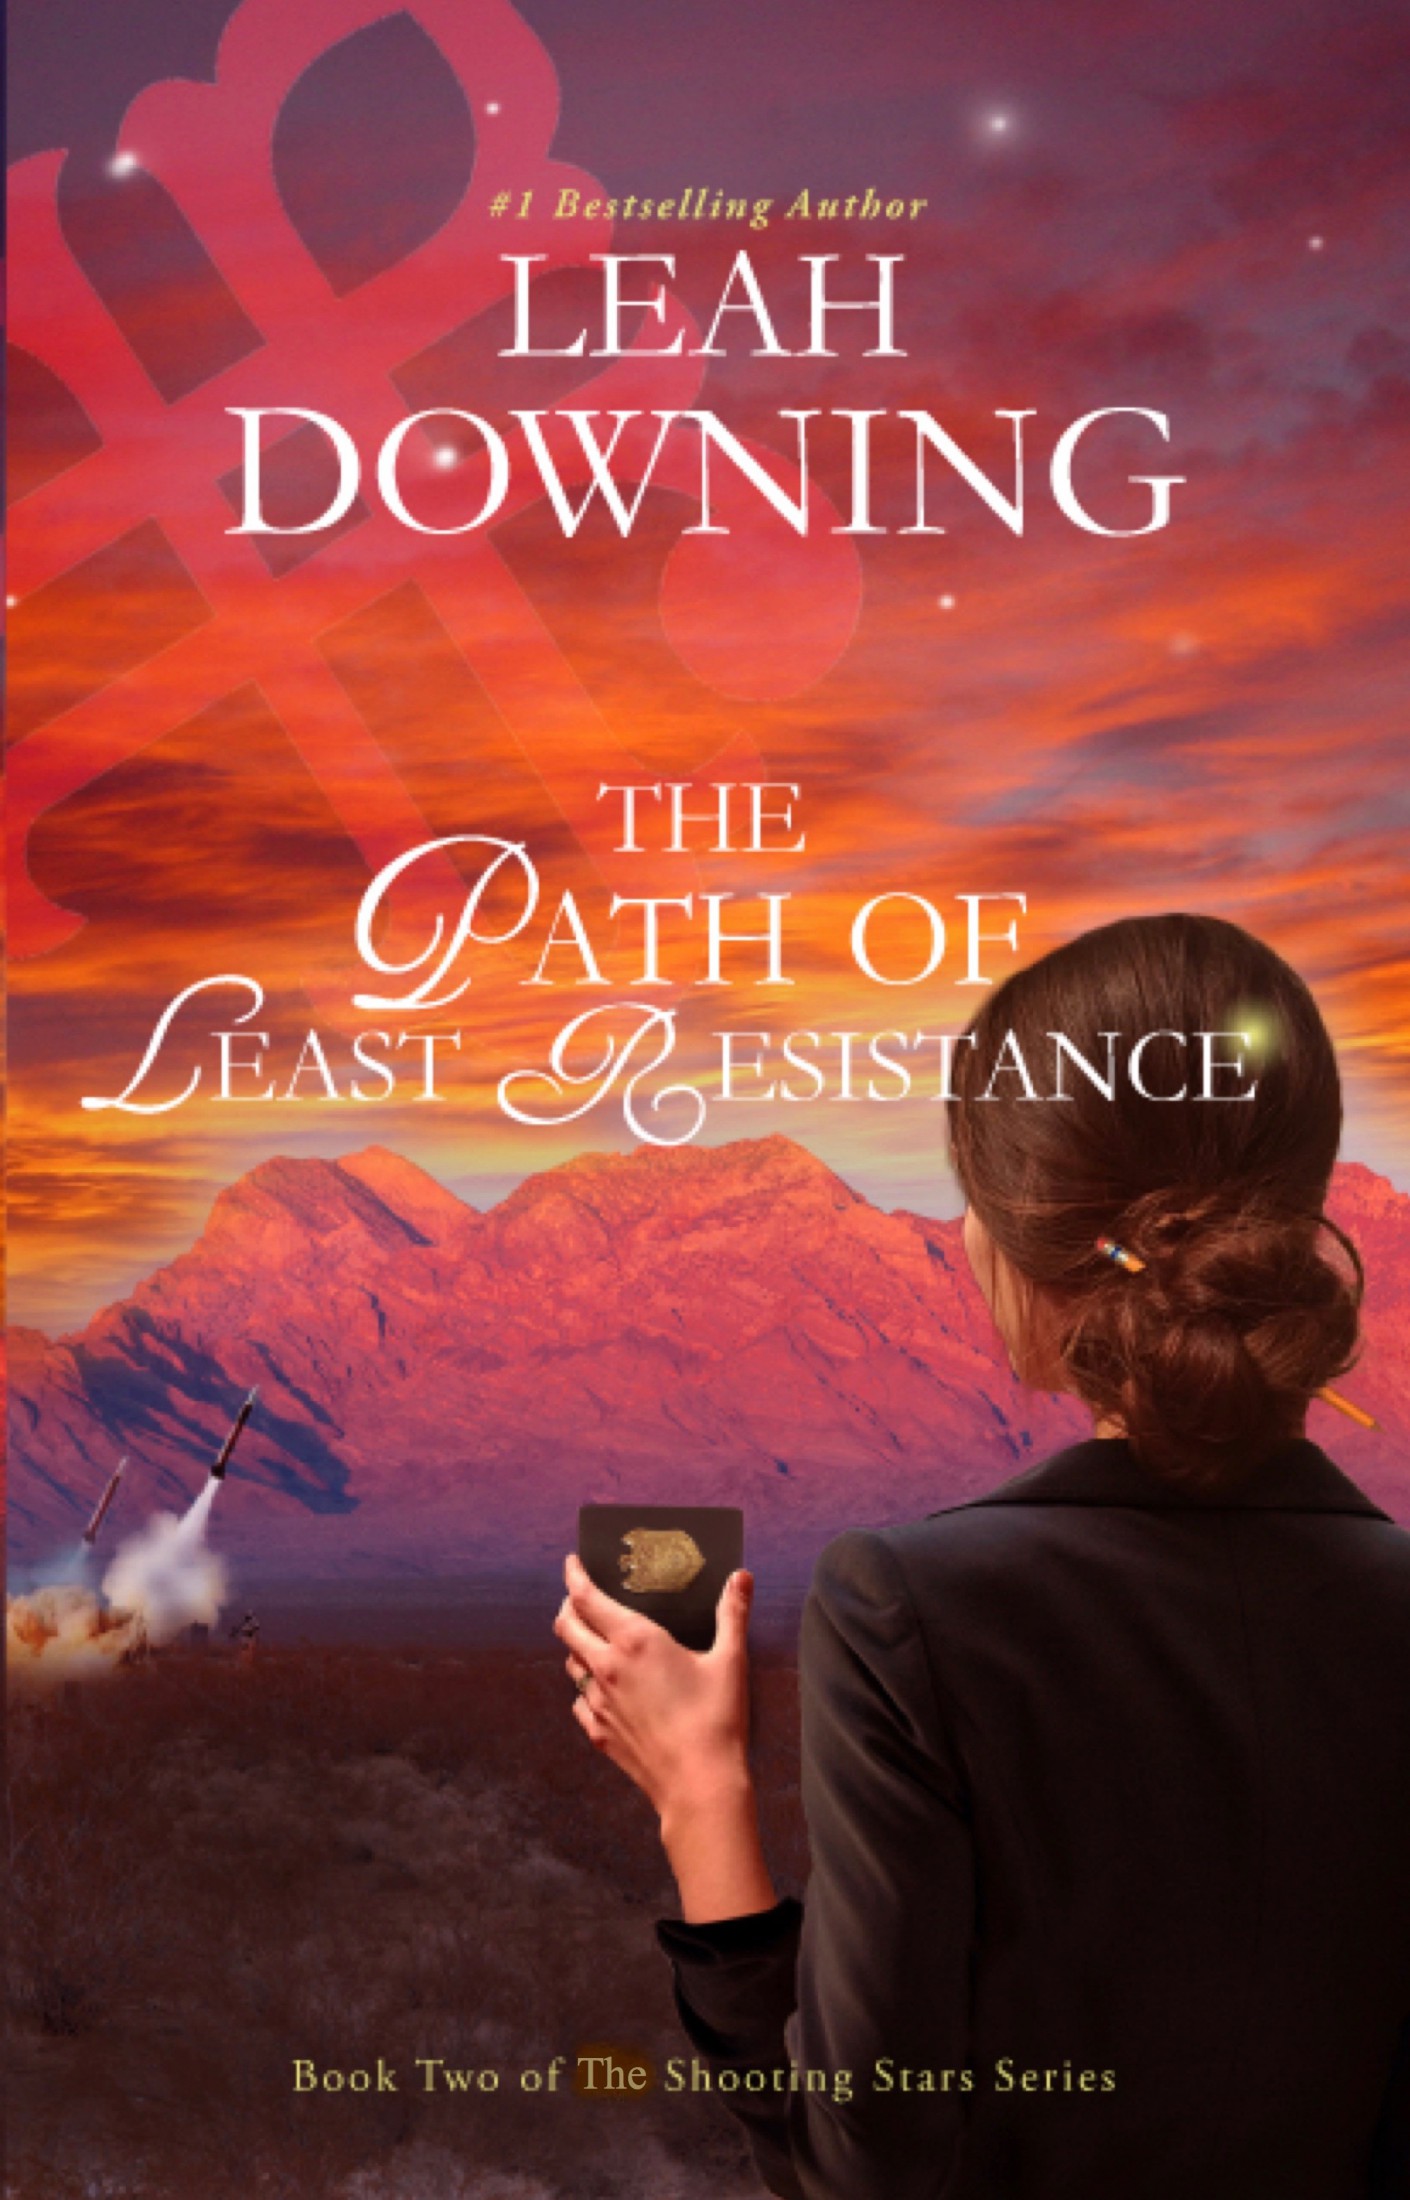 Path of Least Resistance, The - Leah Downing.jpg